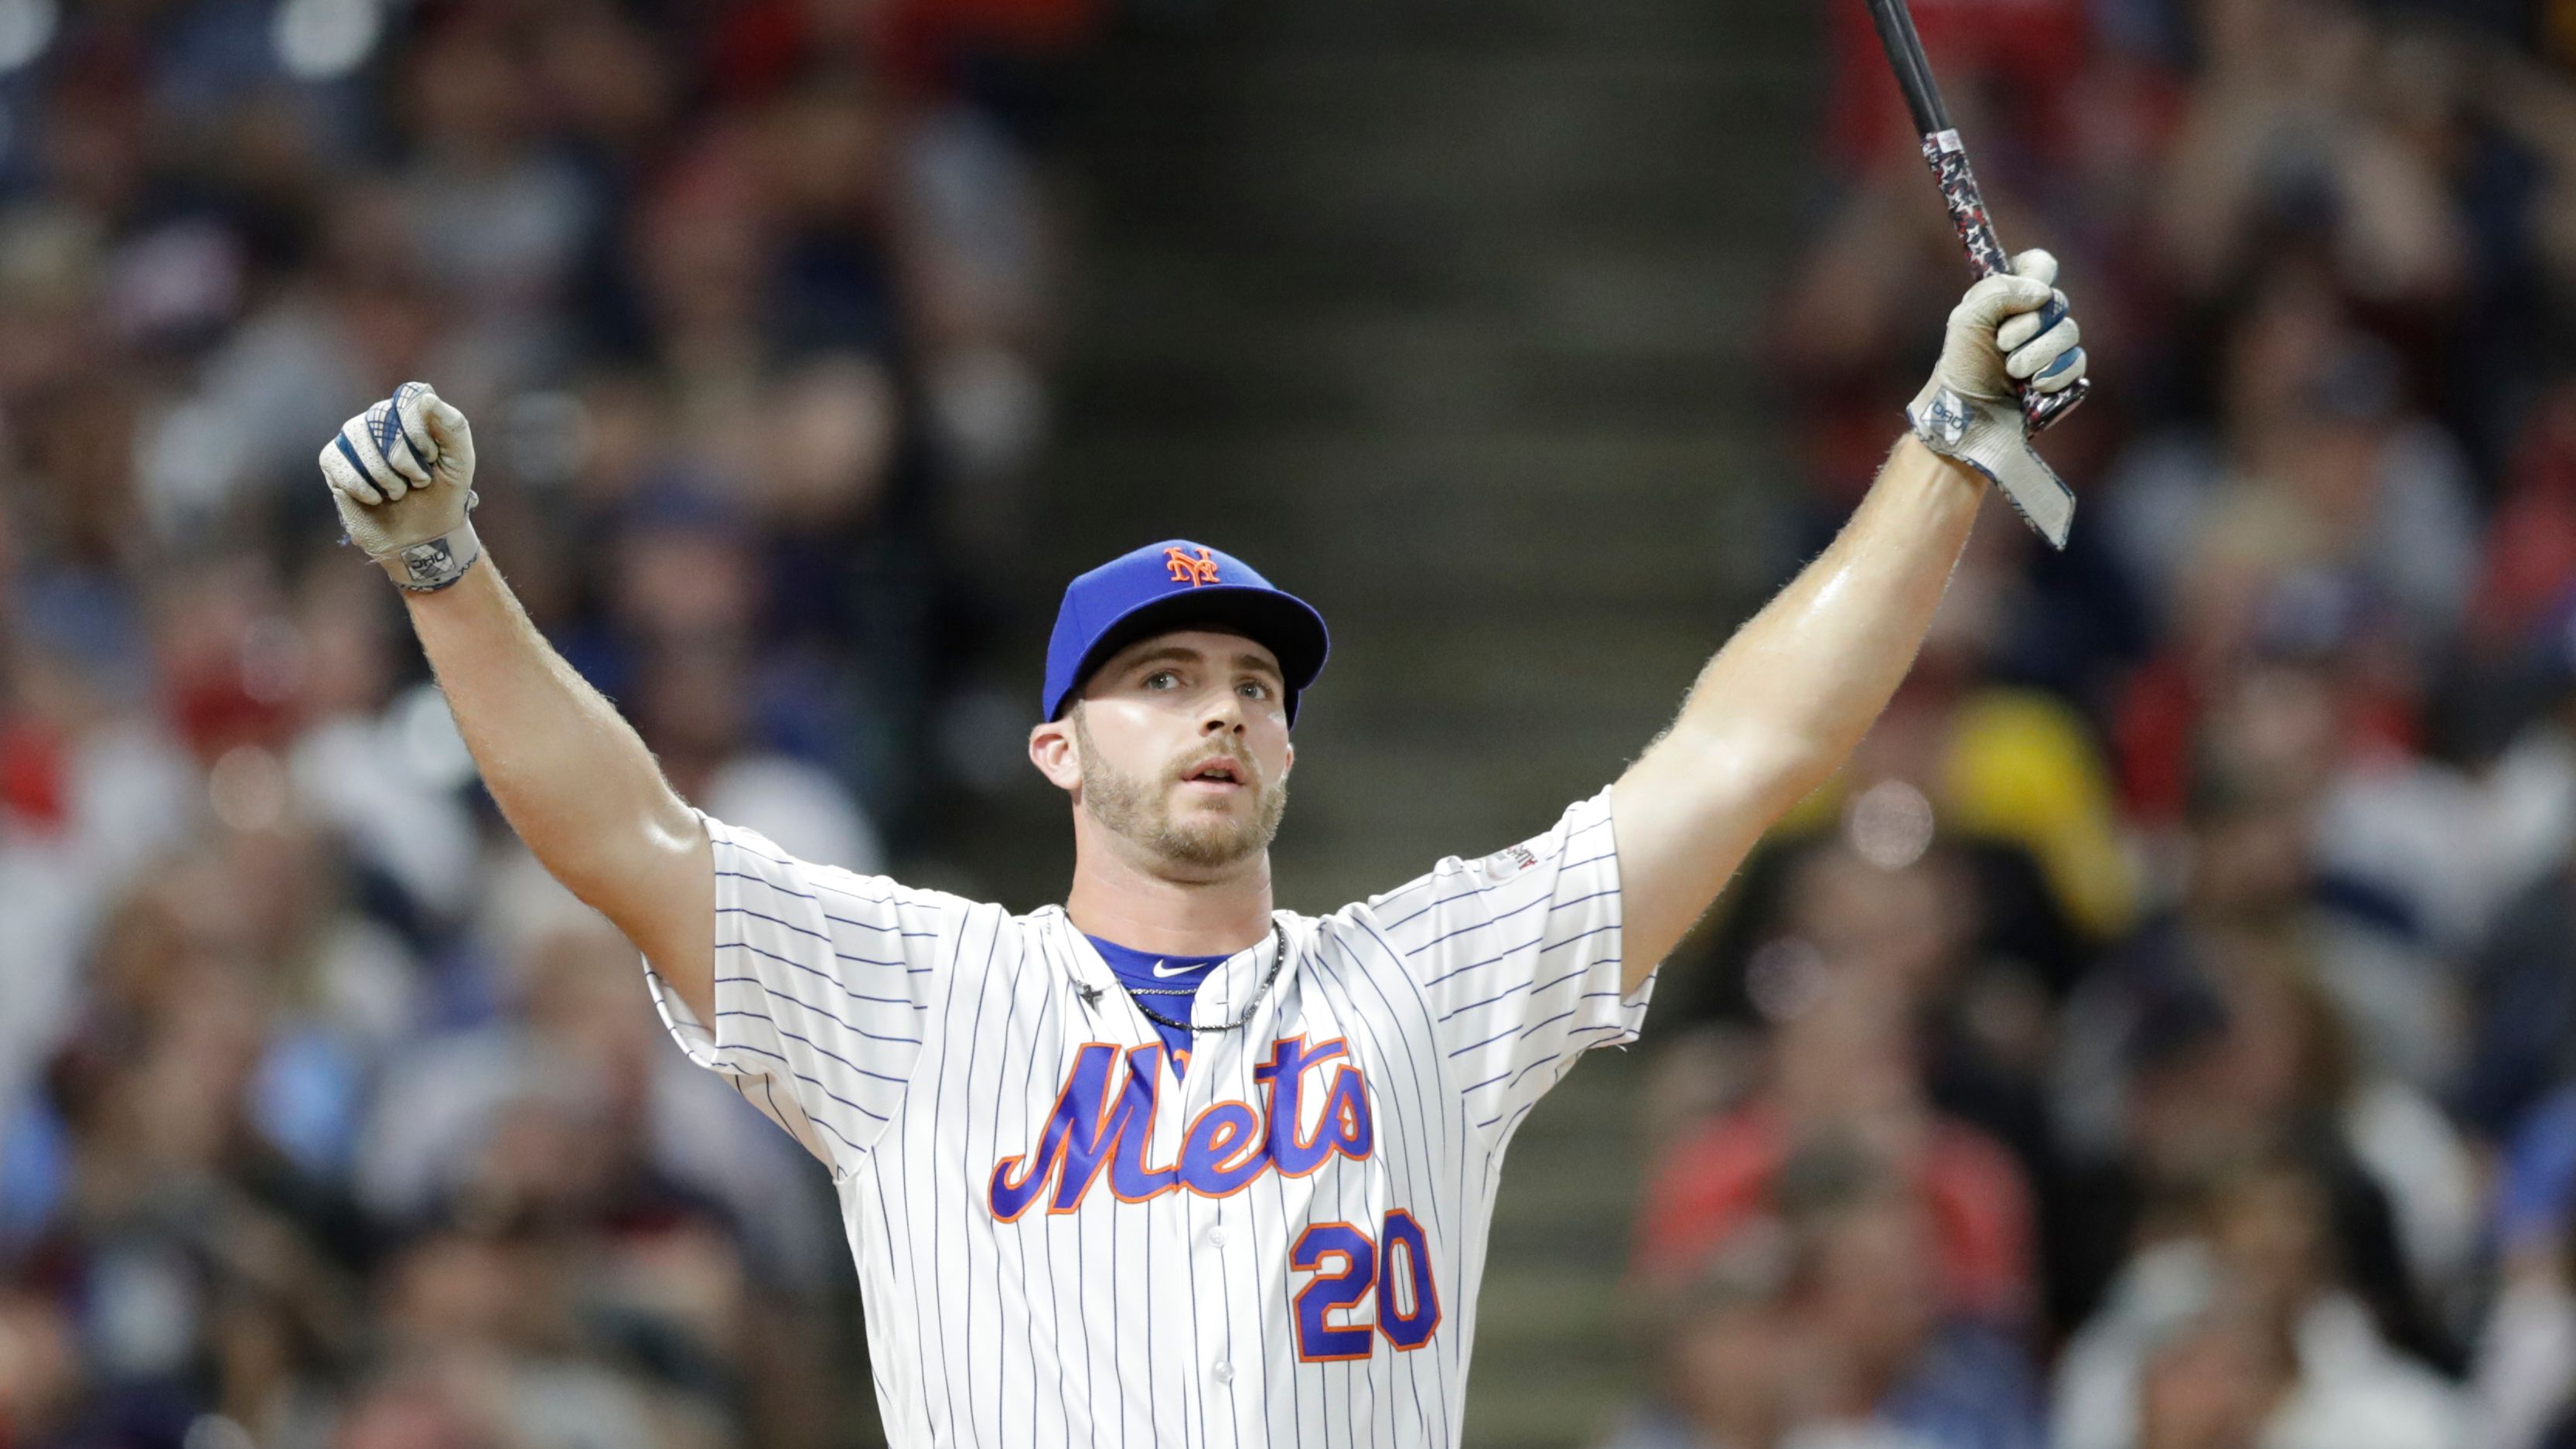 Pete Alonso's two-run homer gives Mets a 'Terrific' walkoff win vs